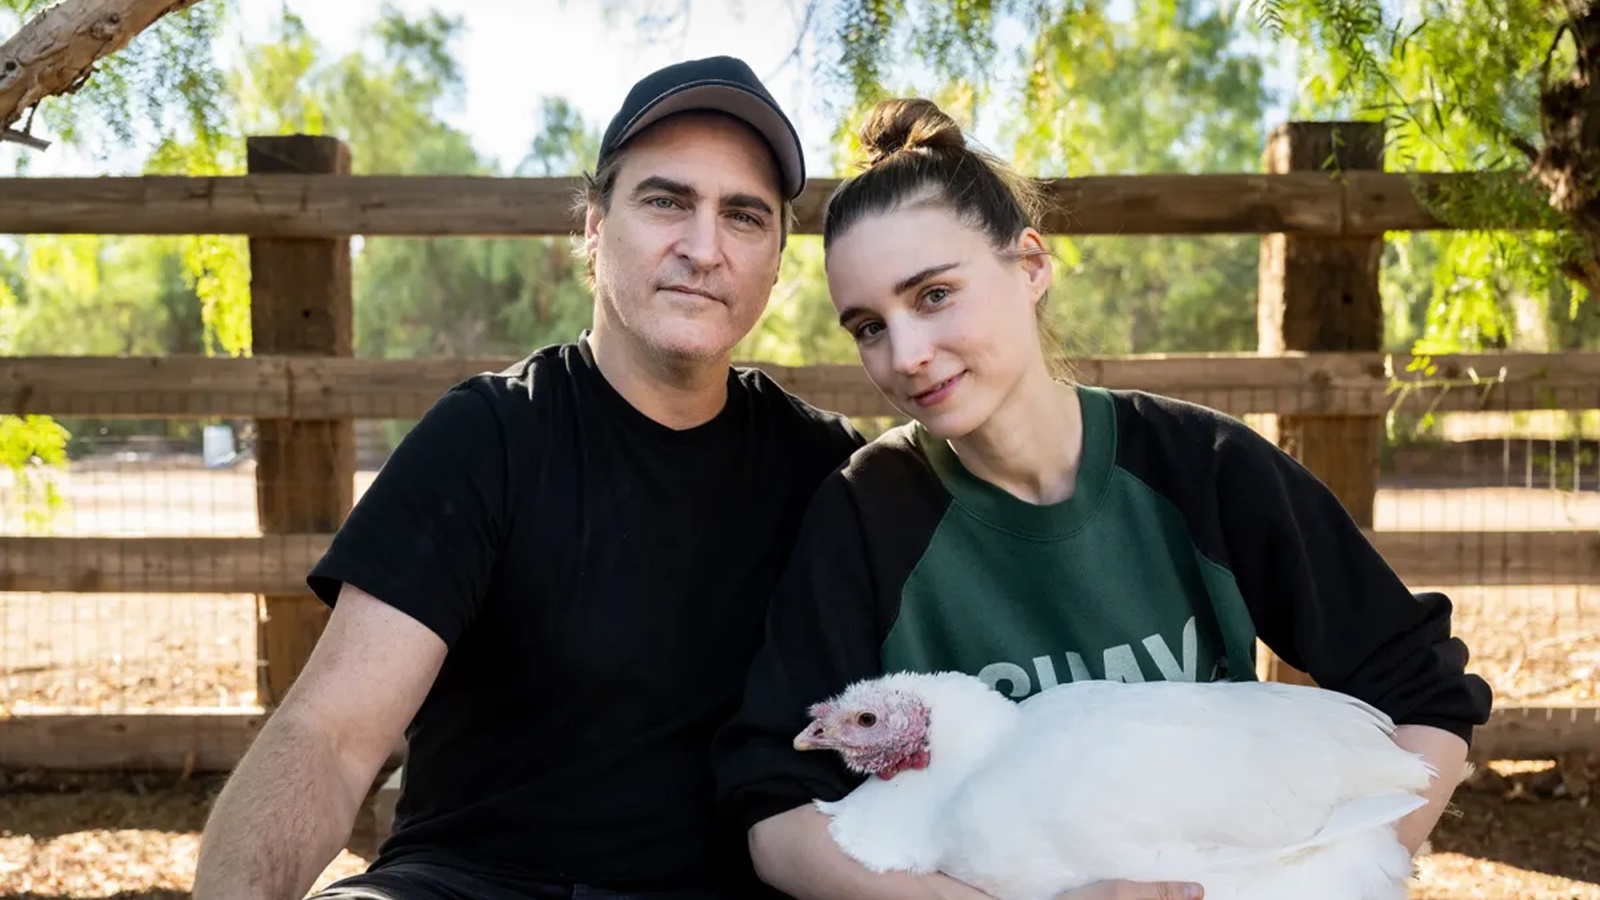 The Island: the shooting of the film with Joaquin Phoenix and Rooney Mara has been cancelled